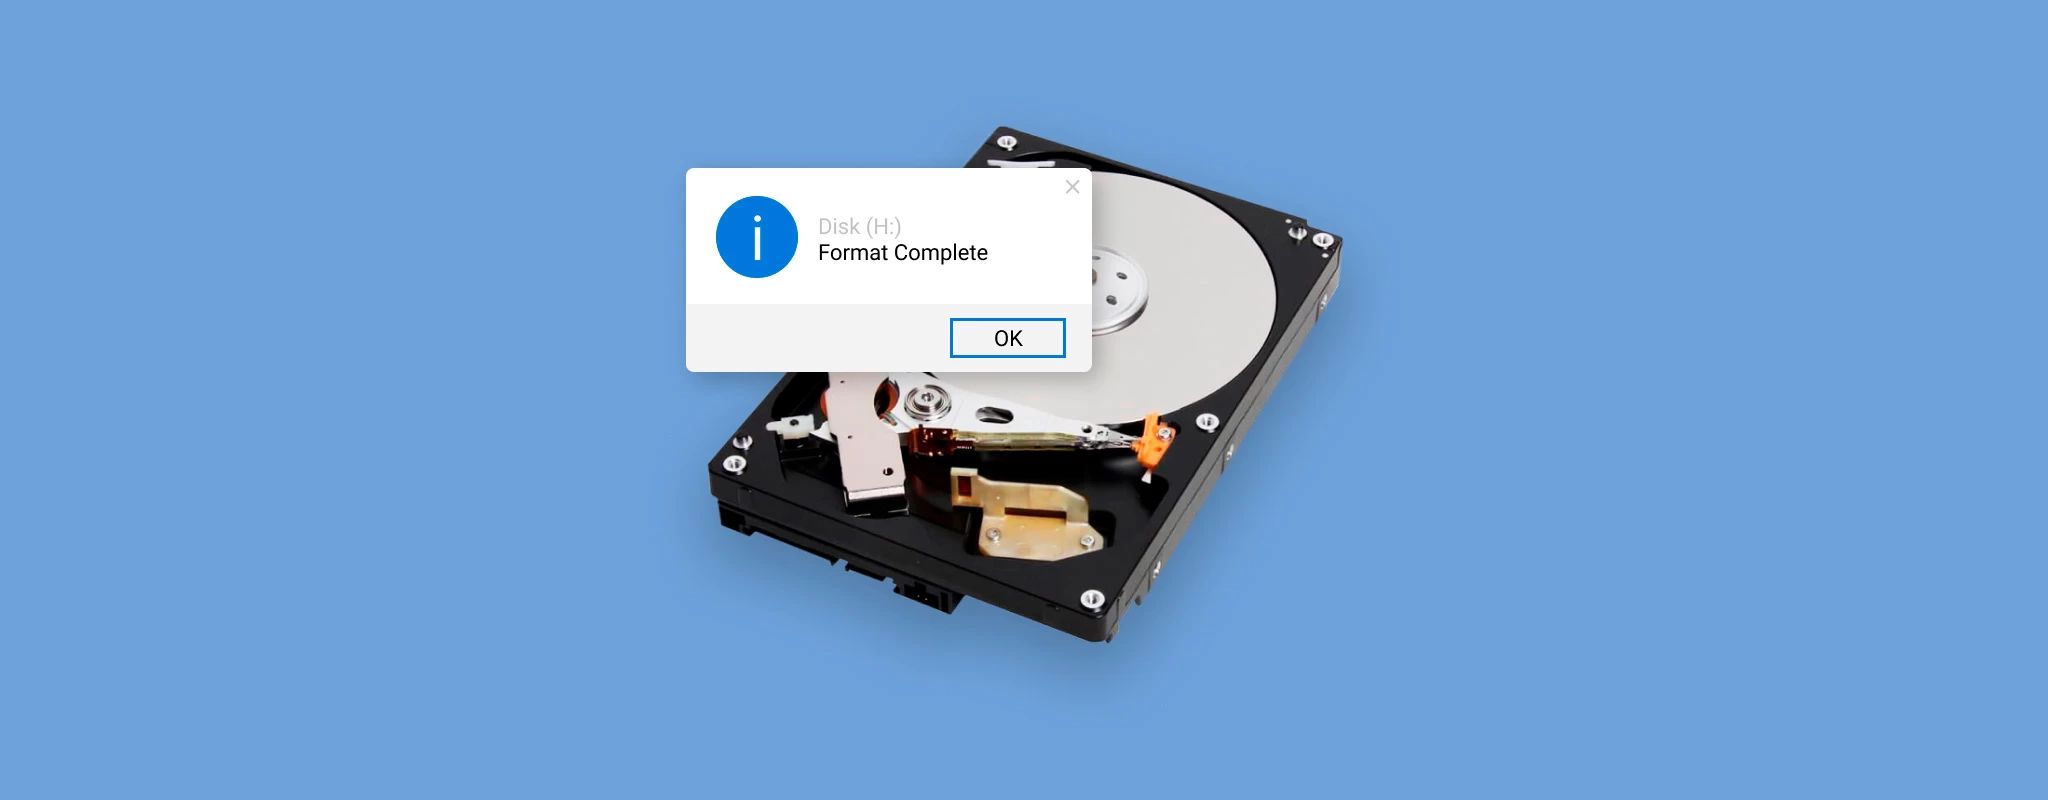 How To Partition And Format A Hard Disk Drive